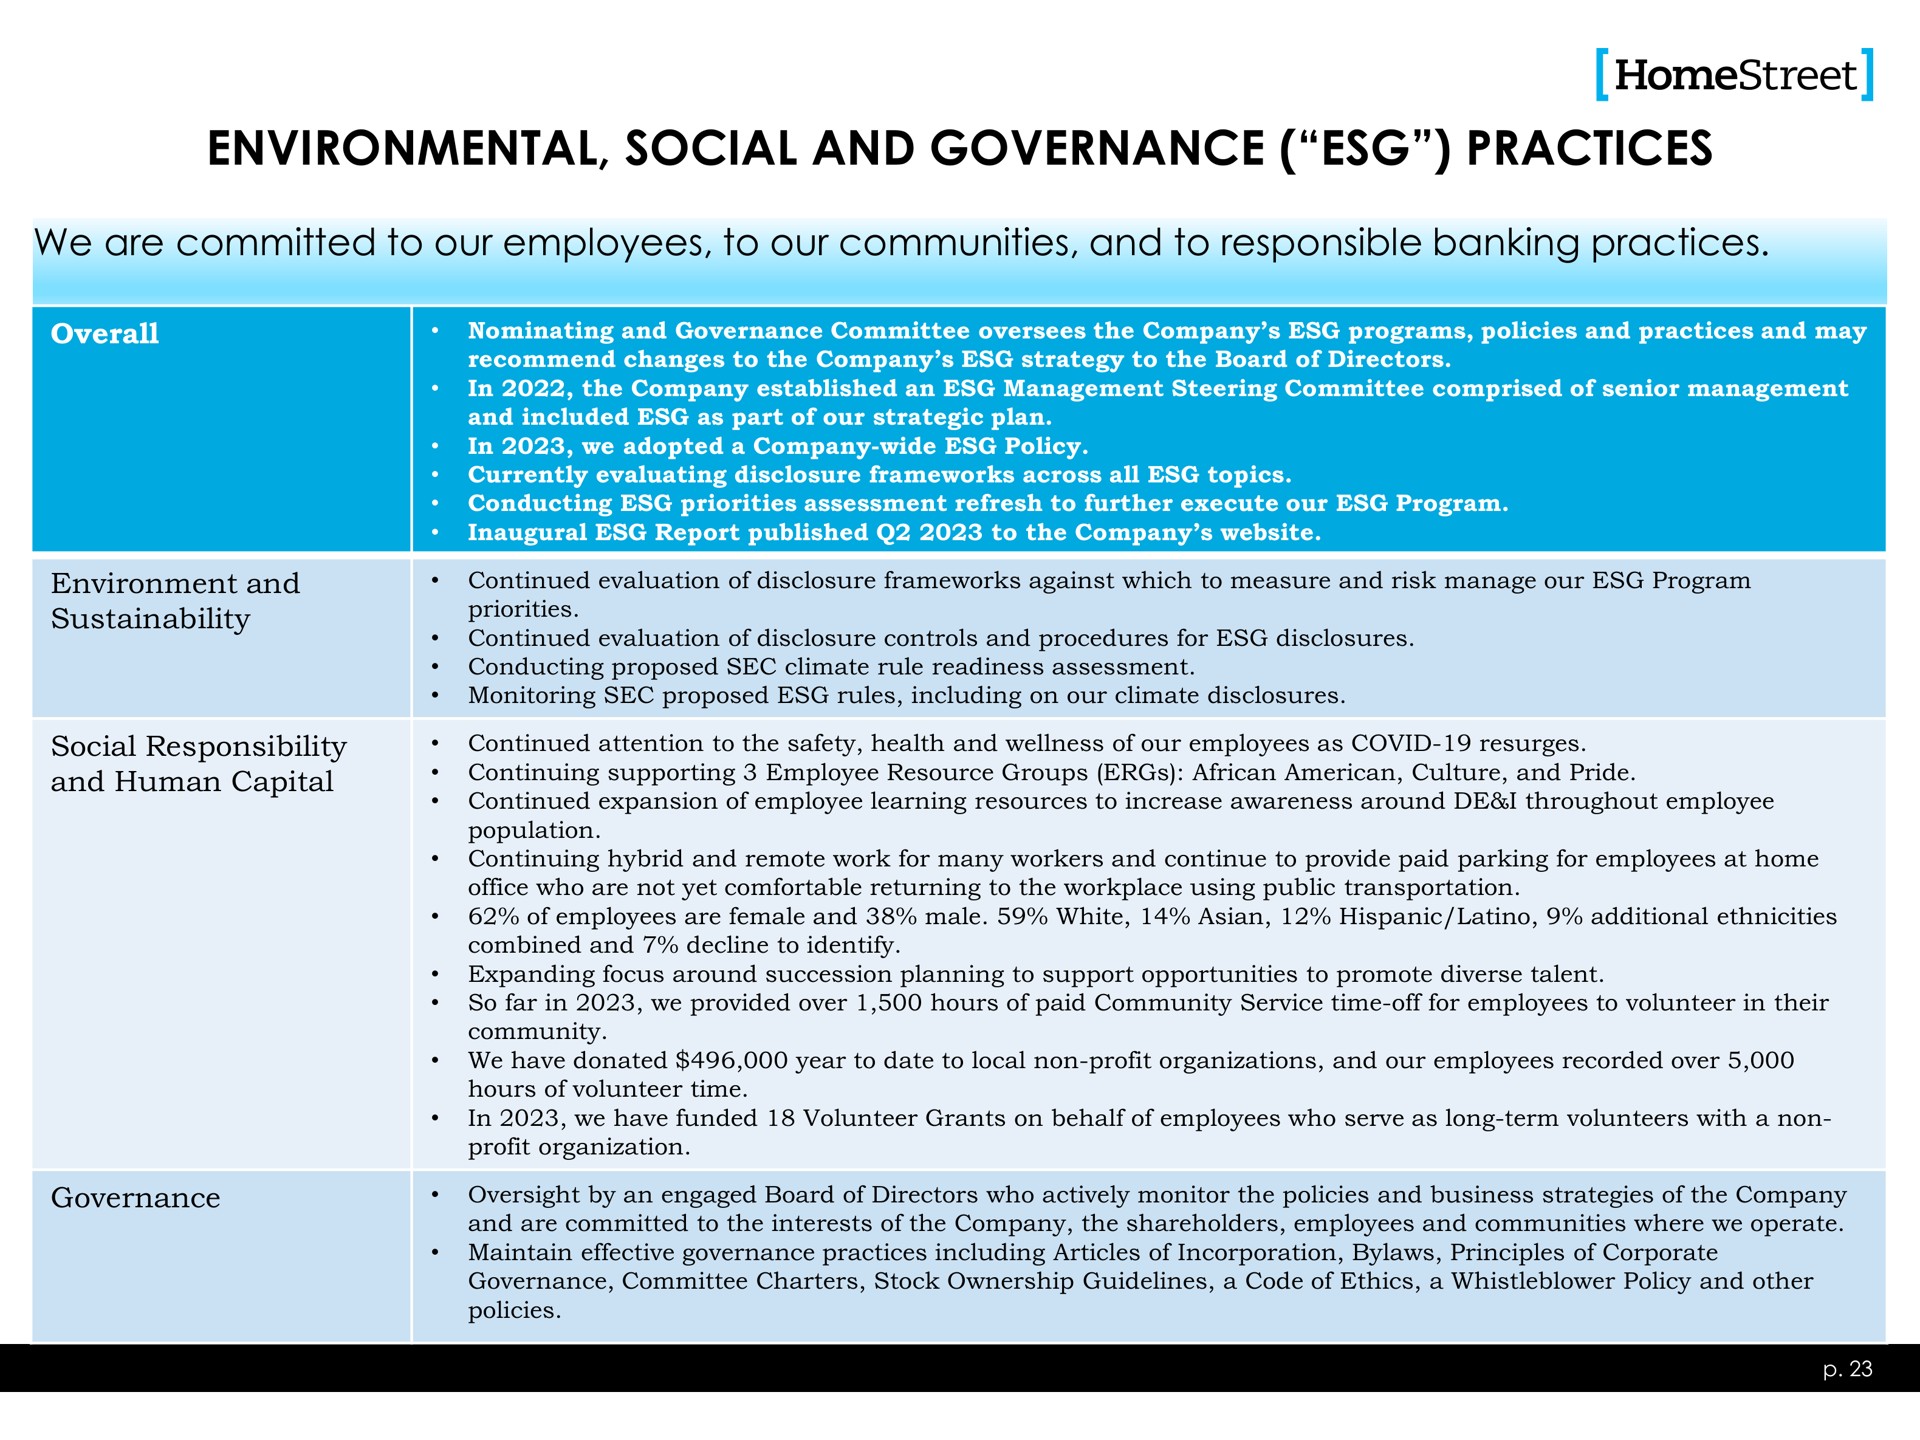 environmental social and governance practices | HomeStreet